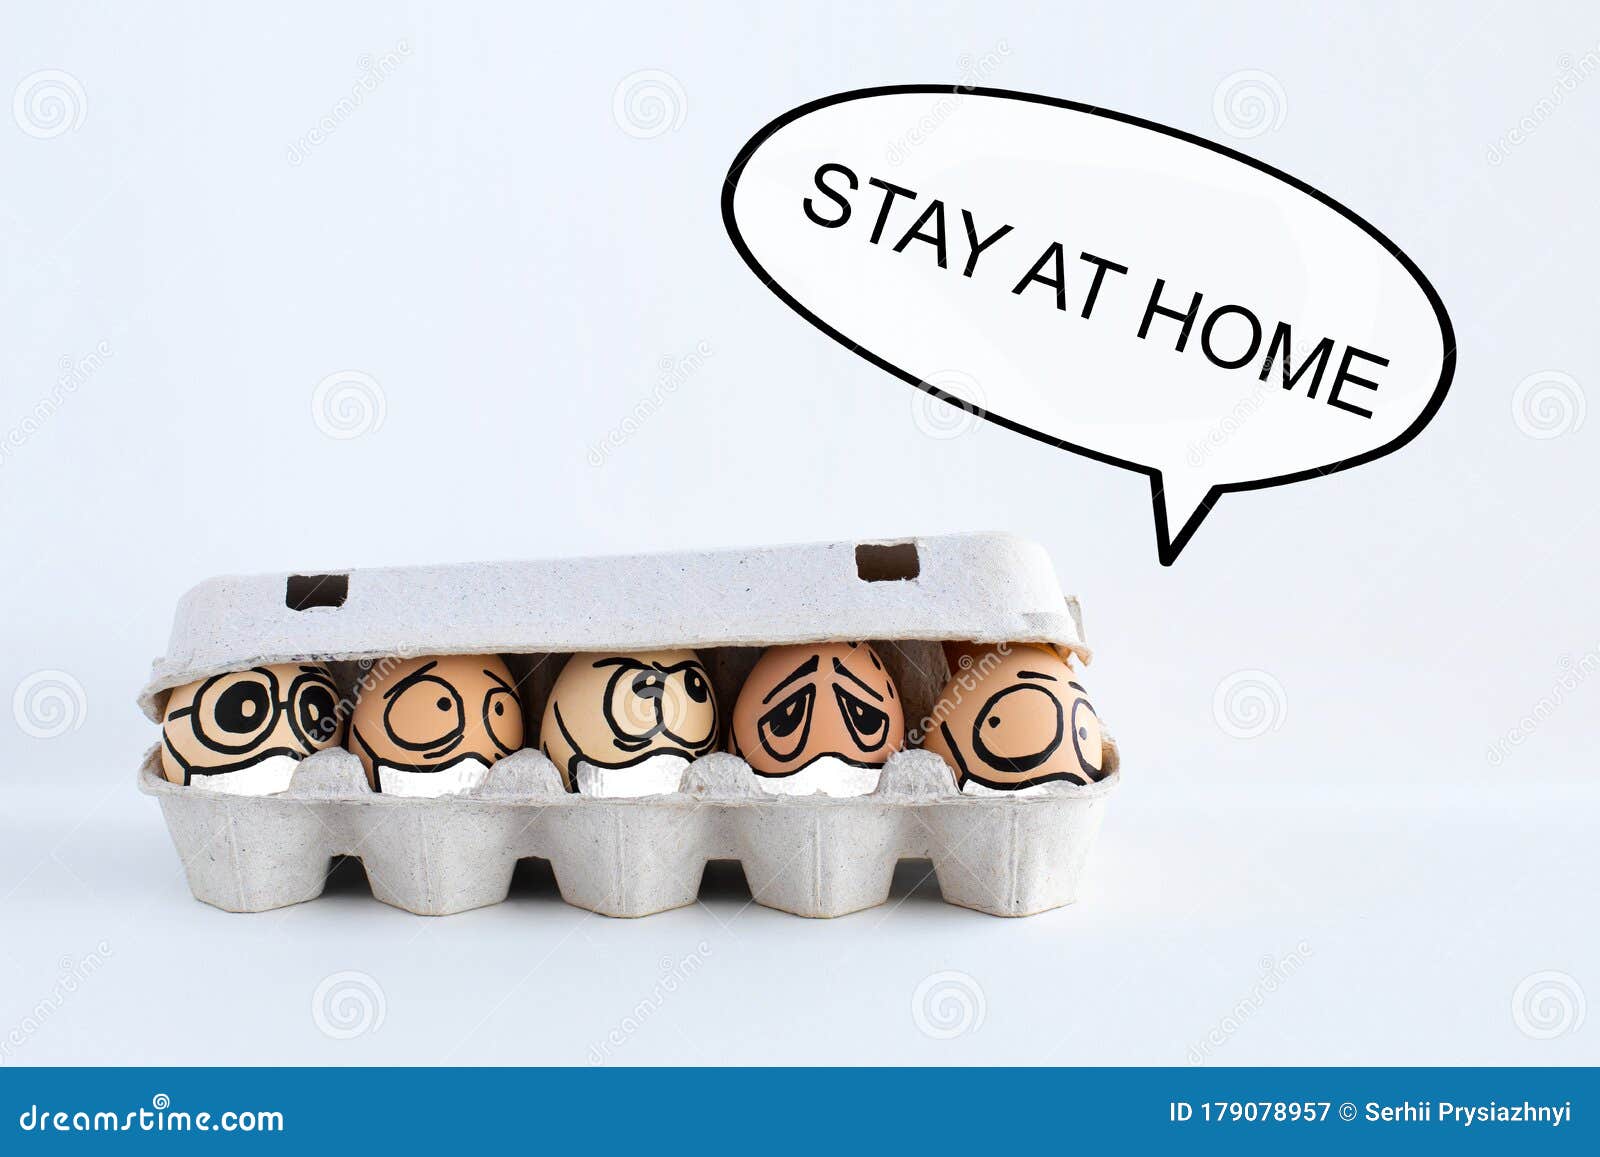 Ten Funny Face Chicken Eggs in Medical Masks Hid at Home on a White  Background, Place for Text, Inscription Stay Home. Covd-19 Stock Image -  Image of eyes, important: 179078957